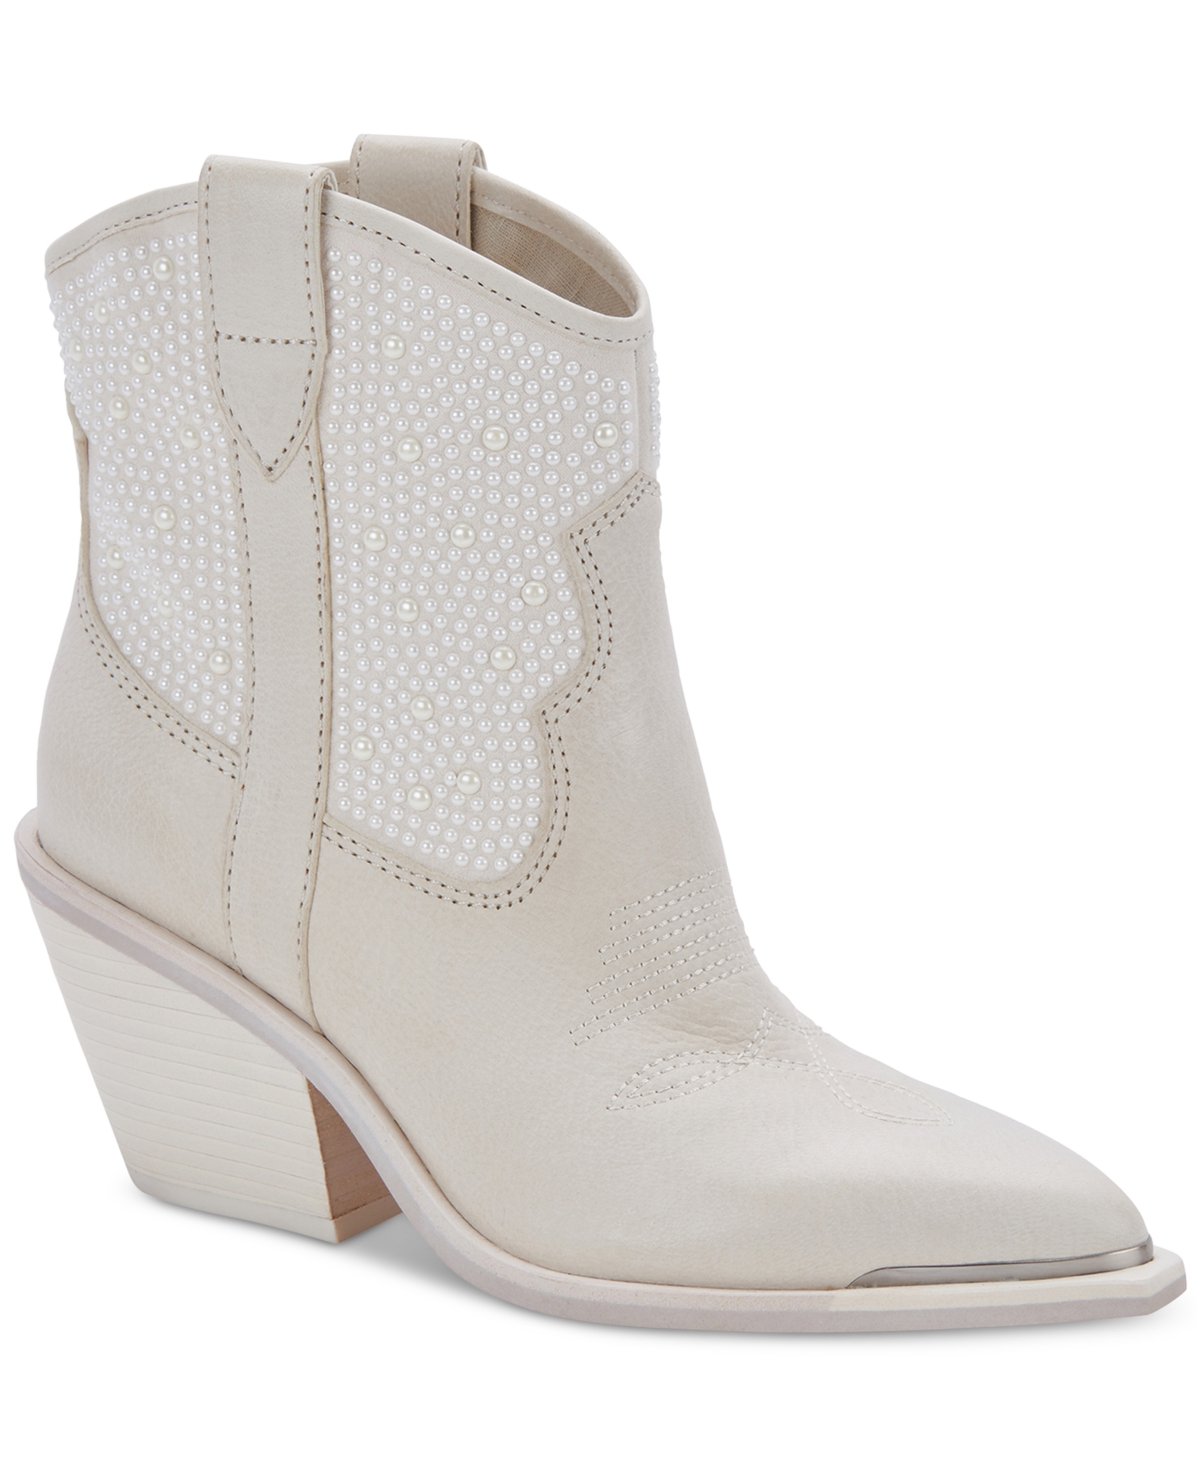 Women's Nashe Embellished Cowboy Booties - Off White Pearls